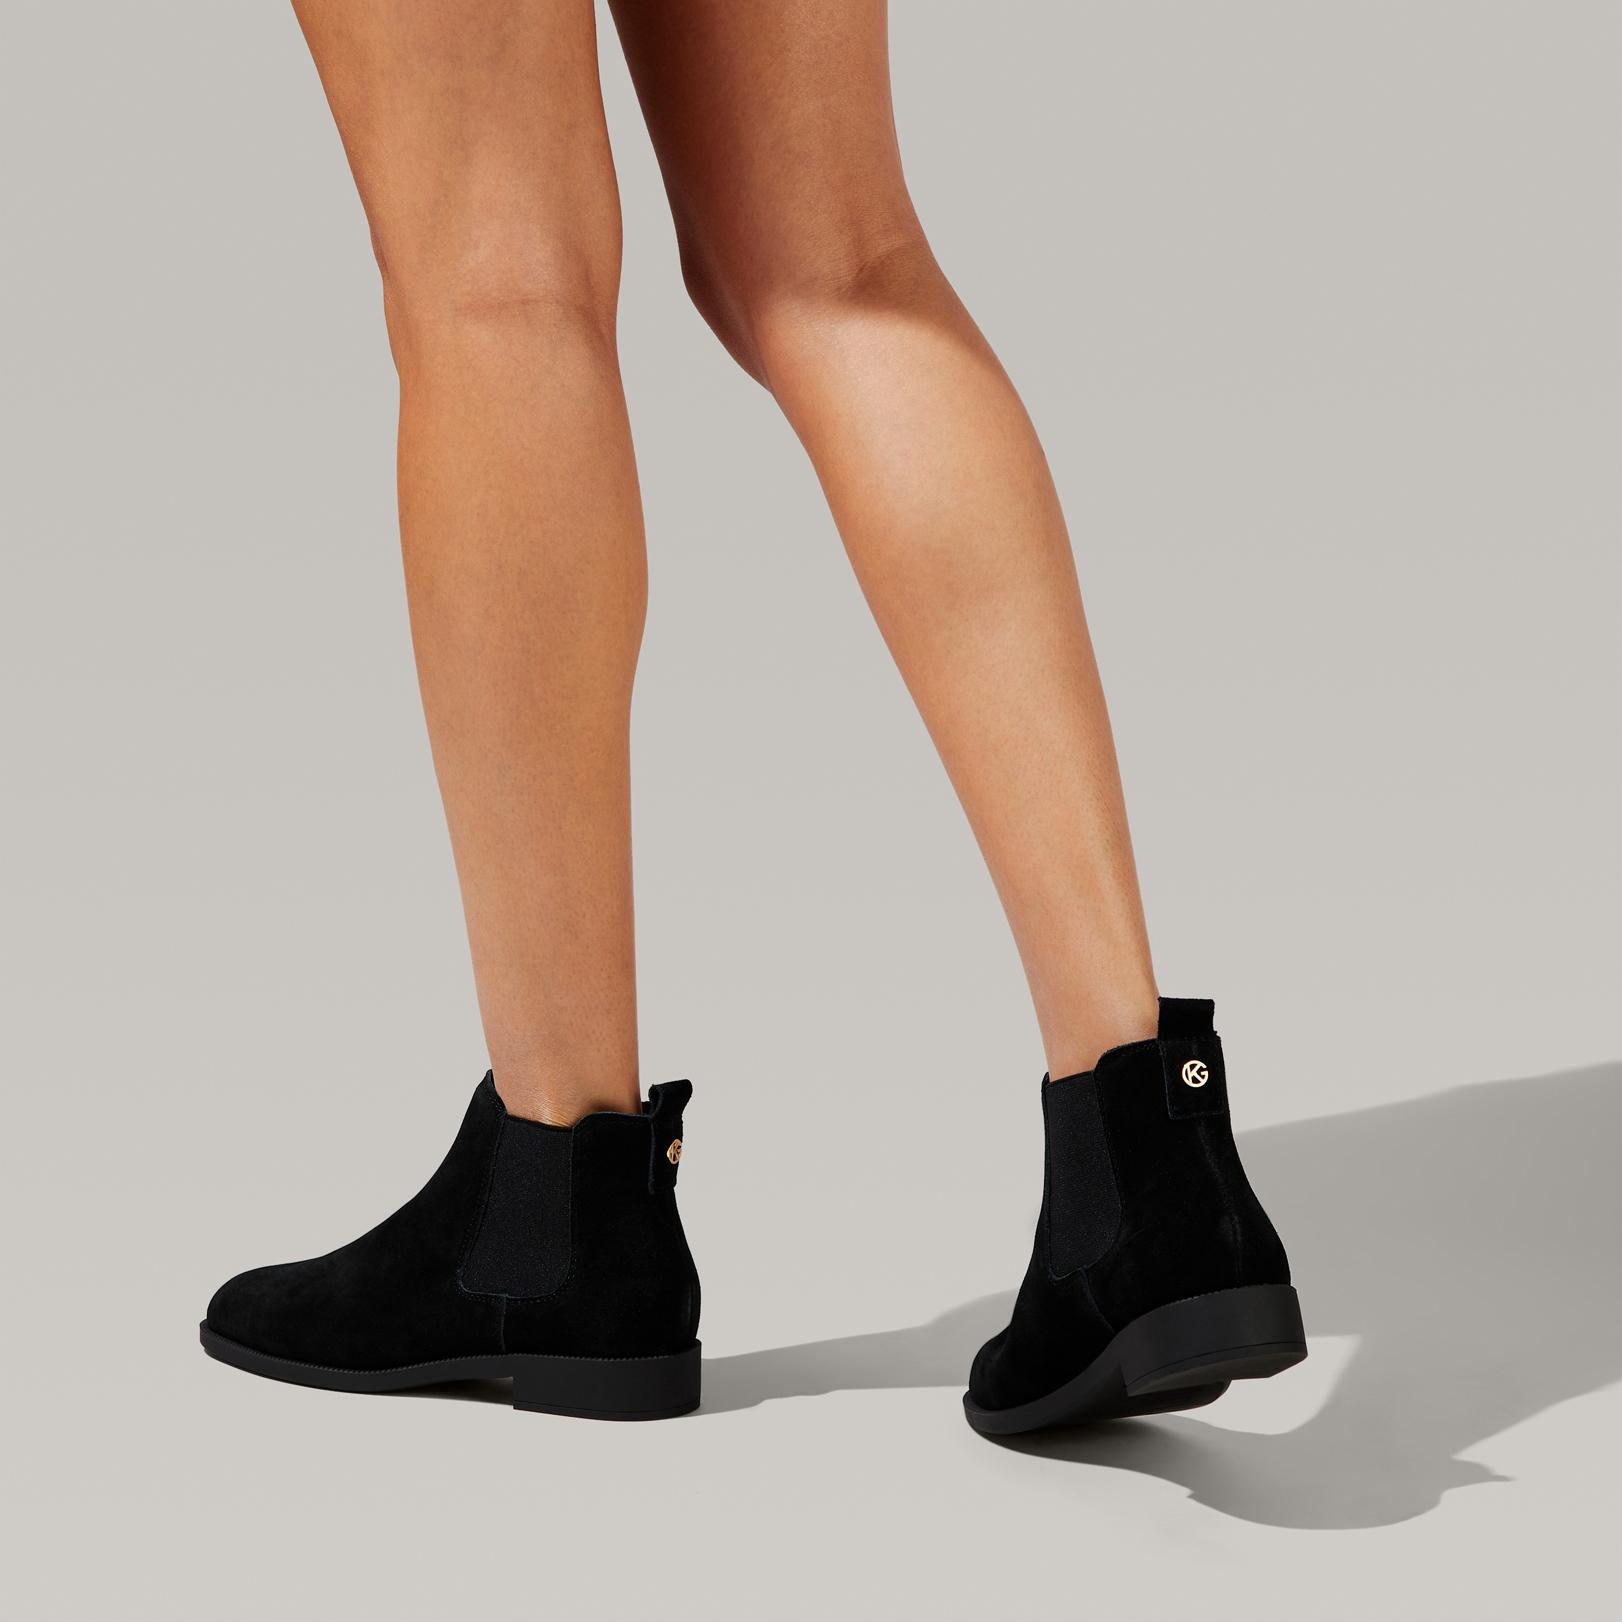 TAMSIN - KG KURT GEIGER Ankle Boots